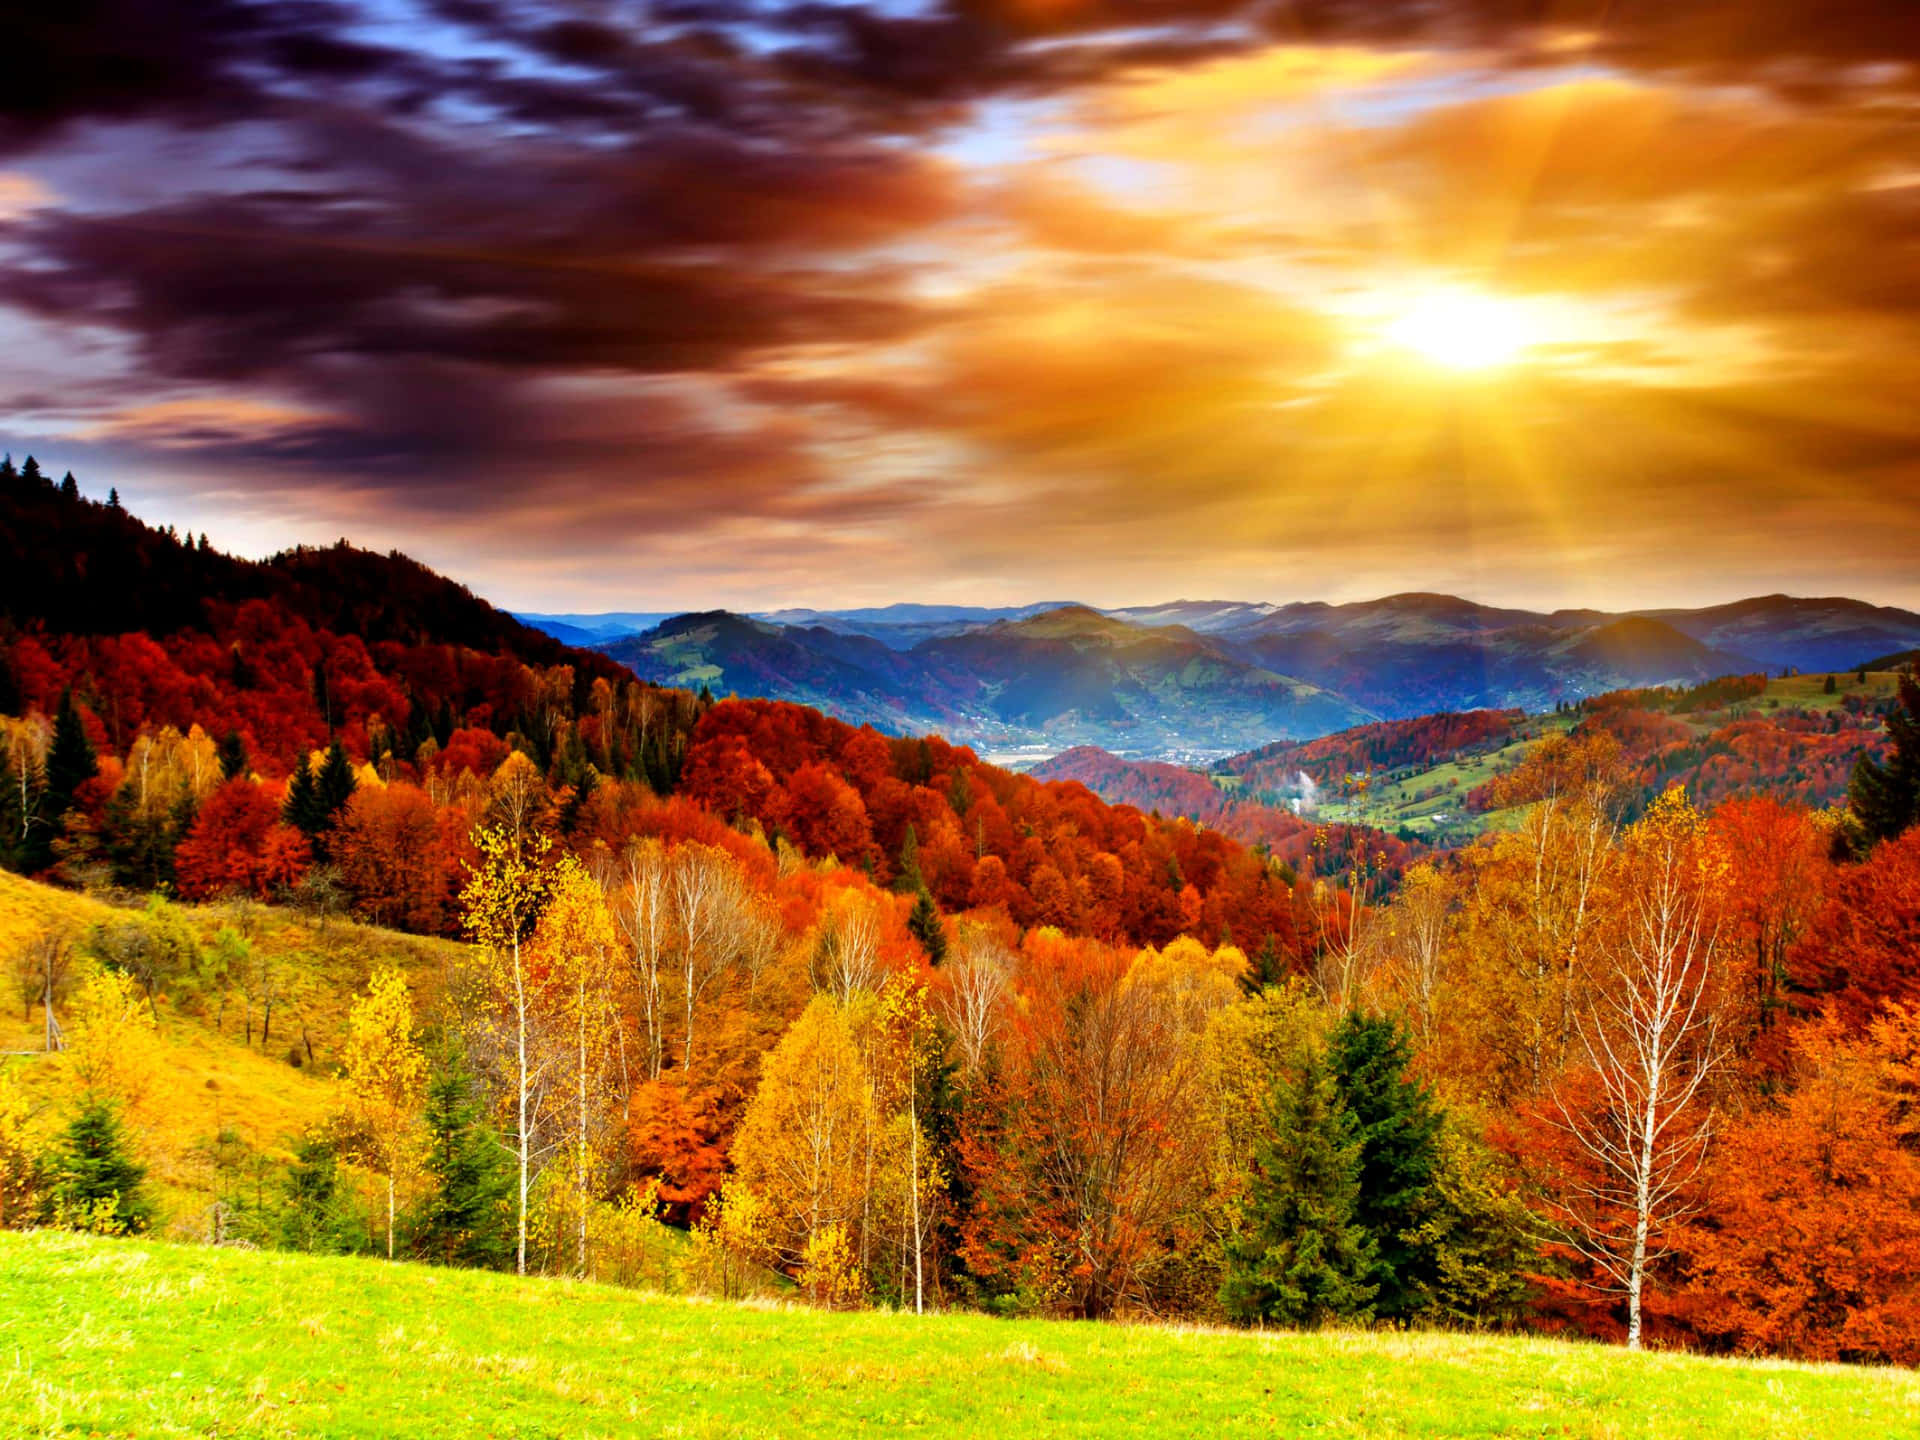 Download Enjoy a stunning landscape of vibrant fall colors